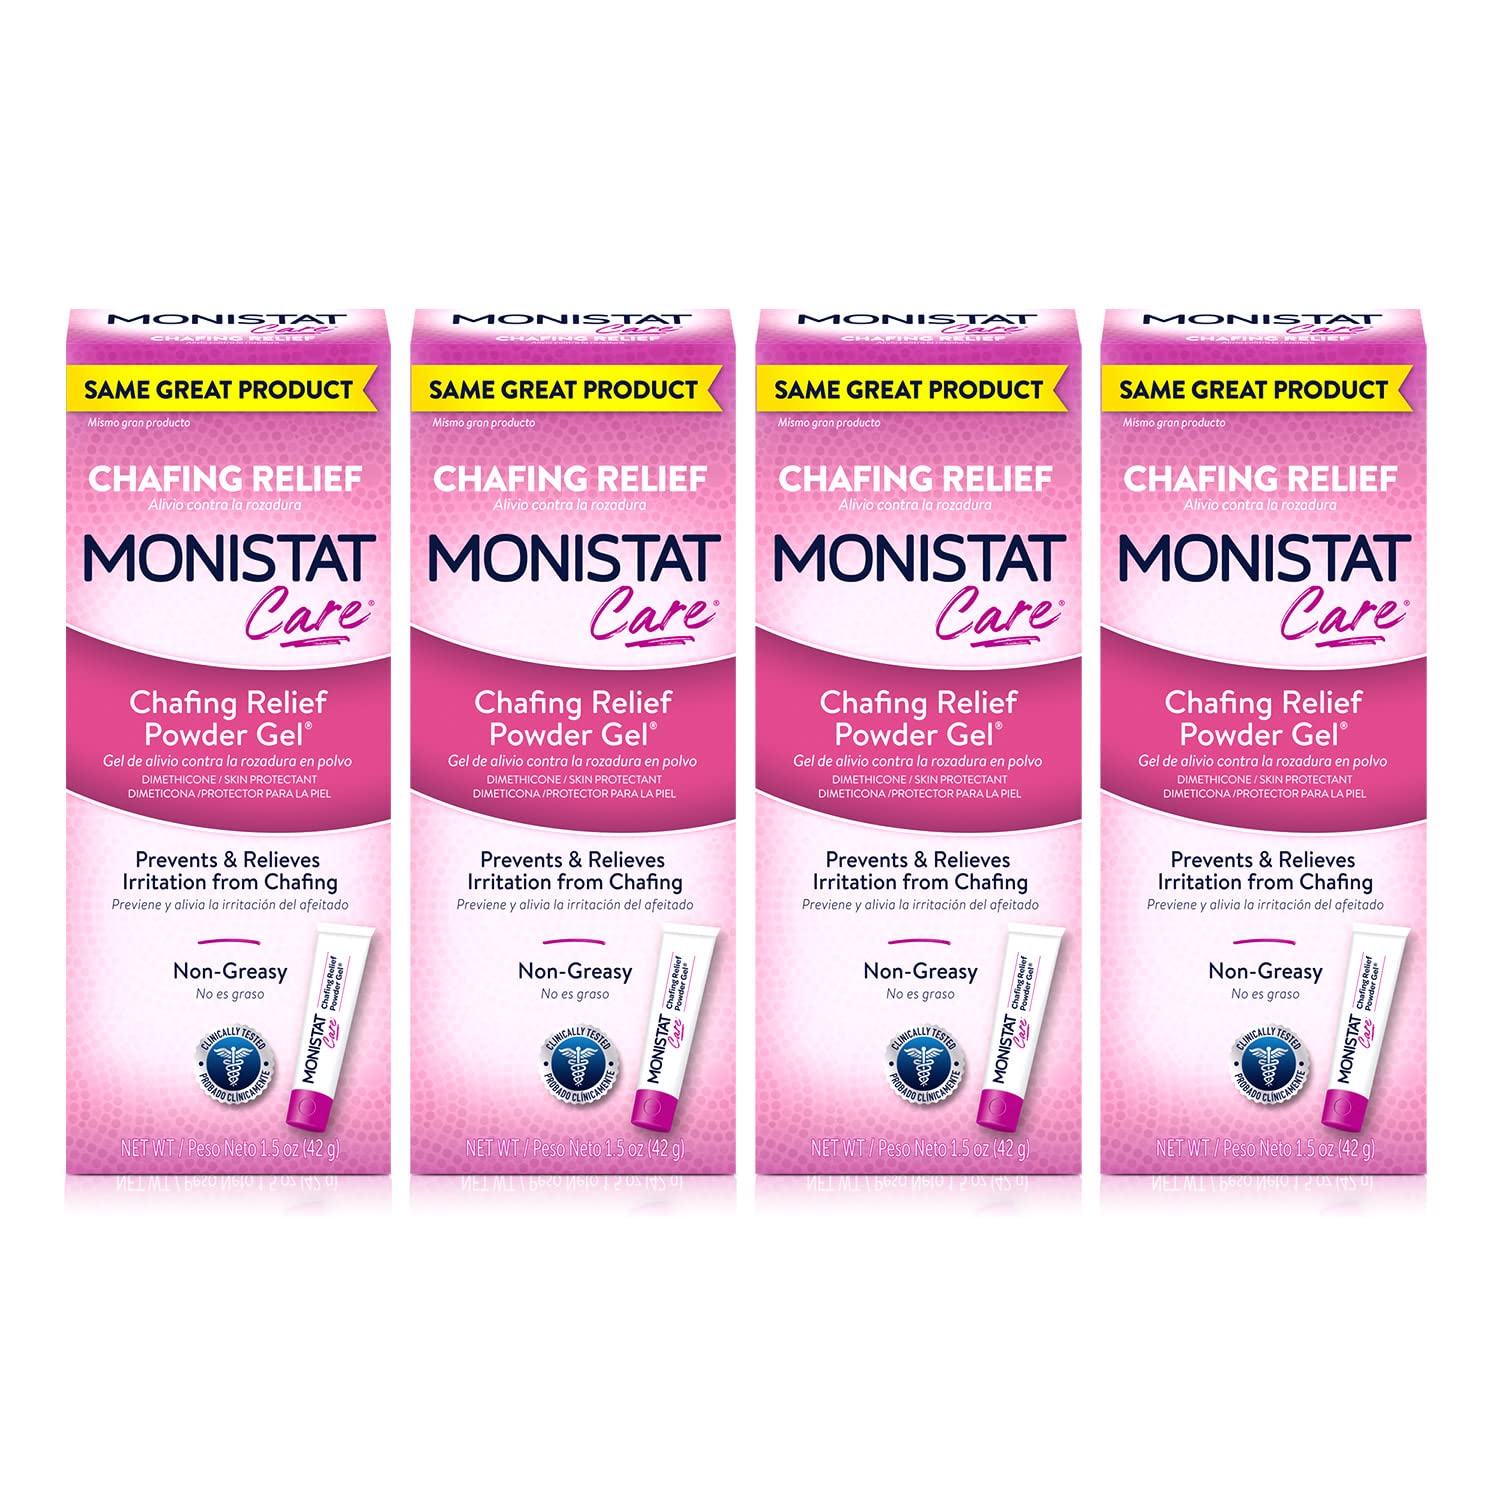 Monistat Chafing Relief Powder Gel, Anti-Chafe Protection, Fragrance Free  Chafing Gel, 1.5 Oz, 1 Pack